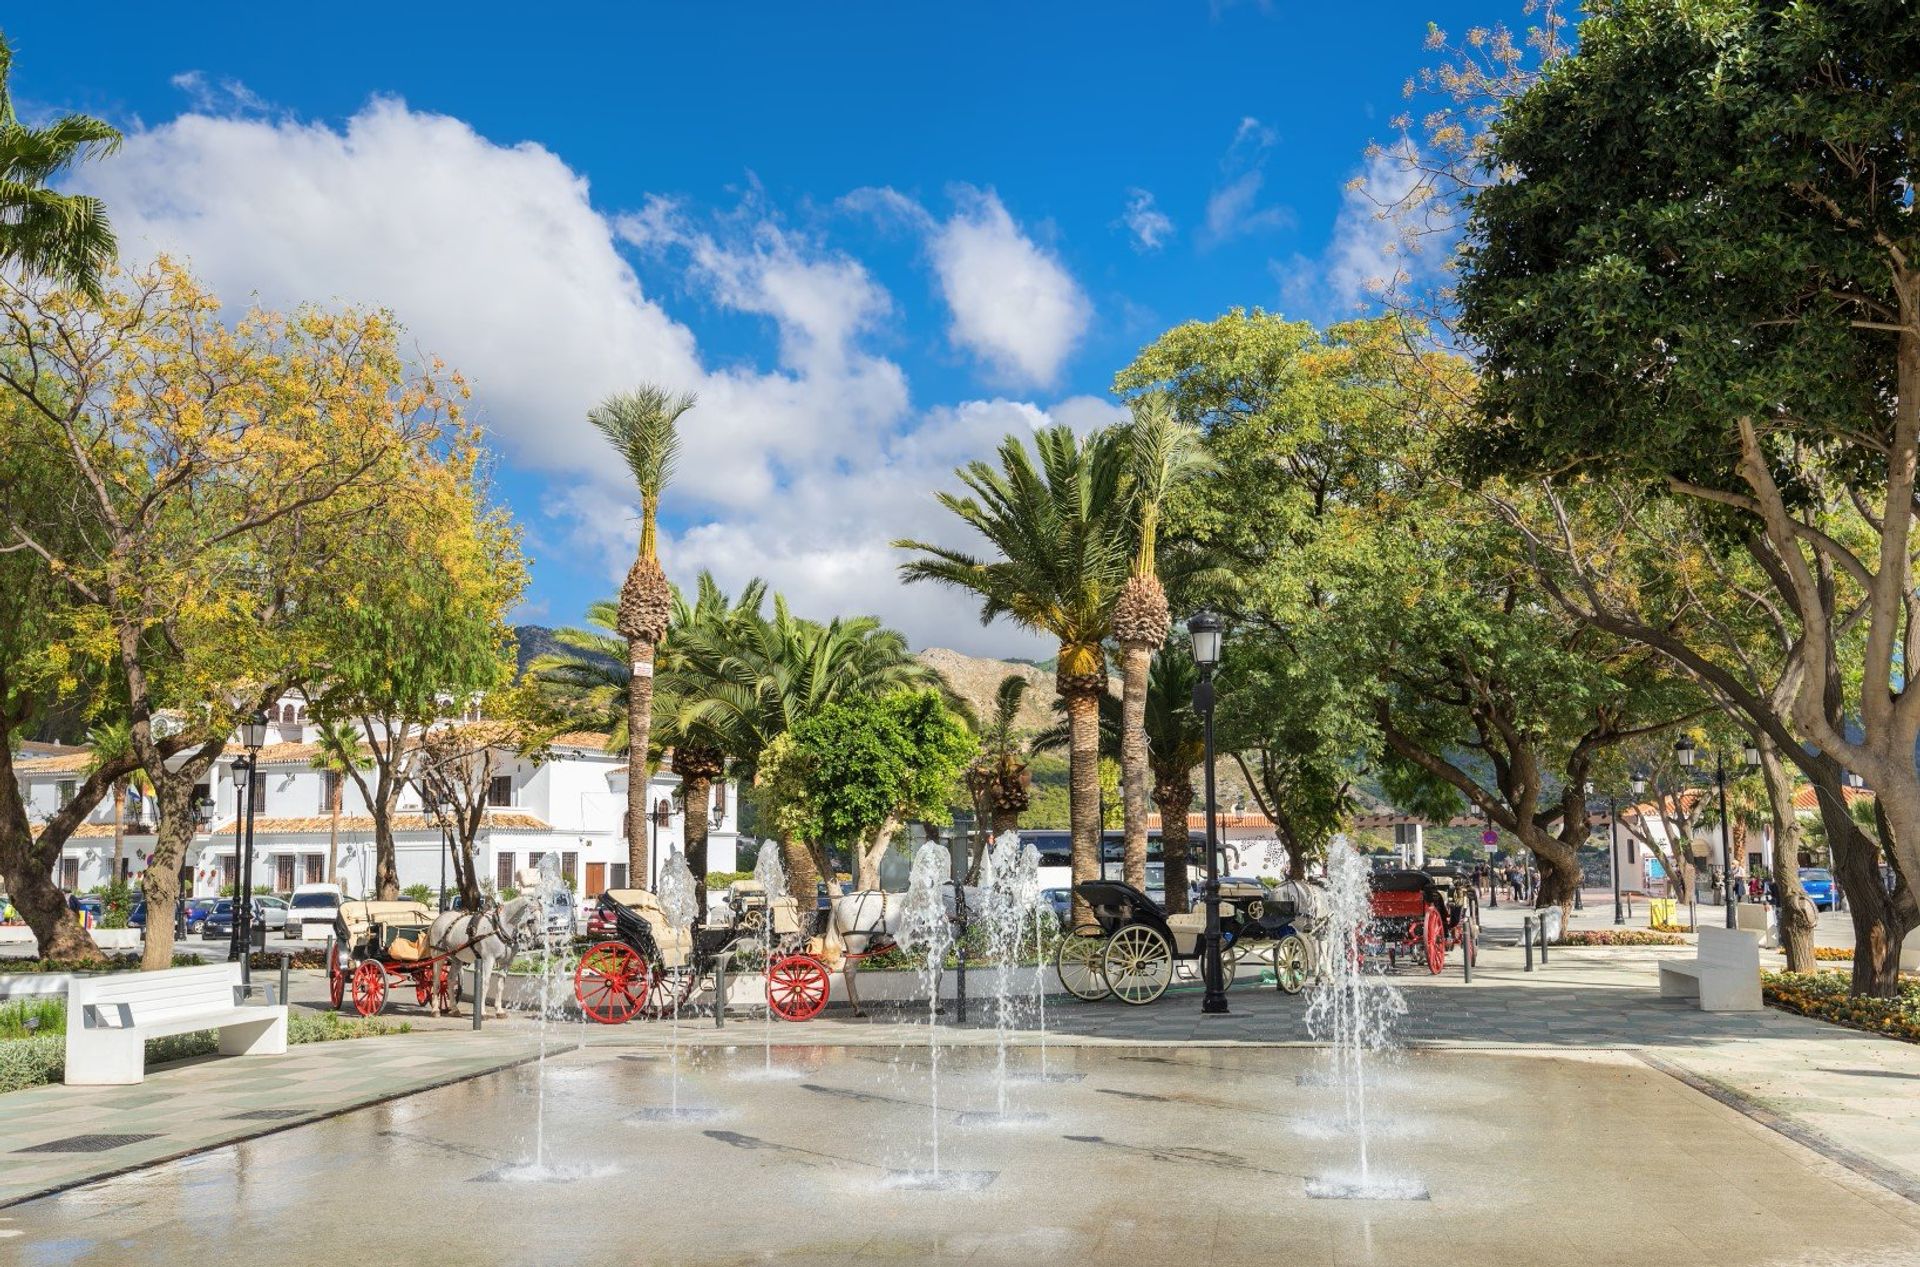 Fountain and horse carriages in the town centre of Mijas